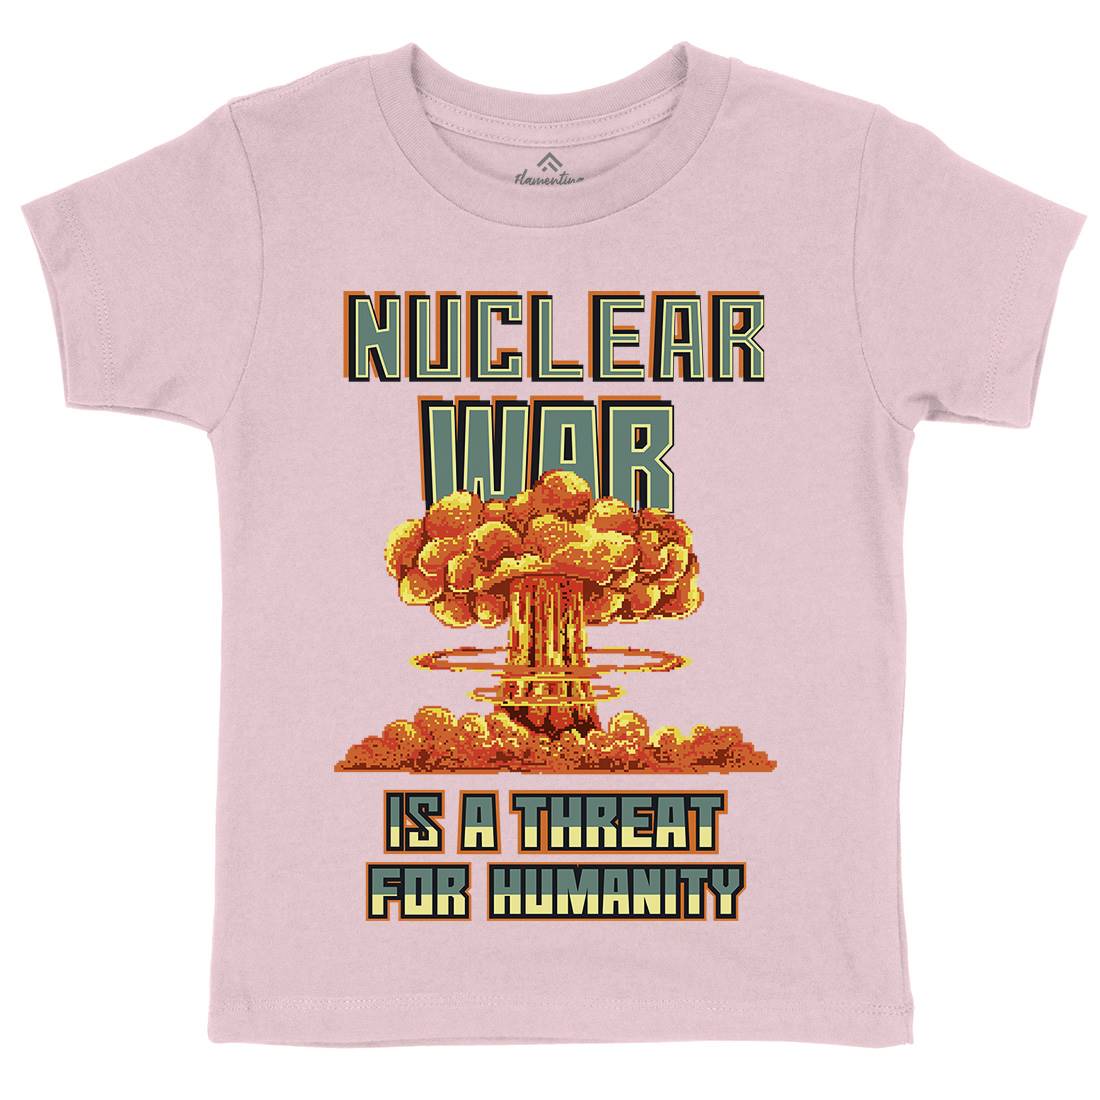 Nuclear War Is A Threat For Humanity Kids Organic Crew Neck T-Shirt Army B941